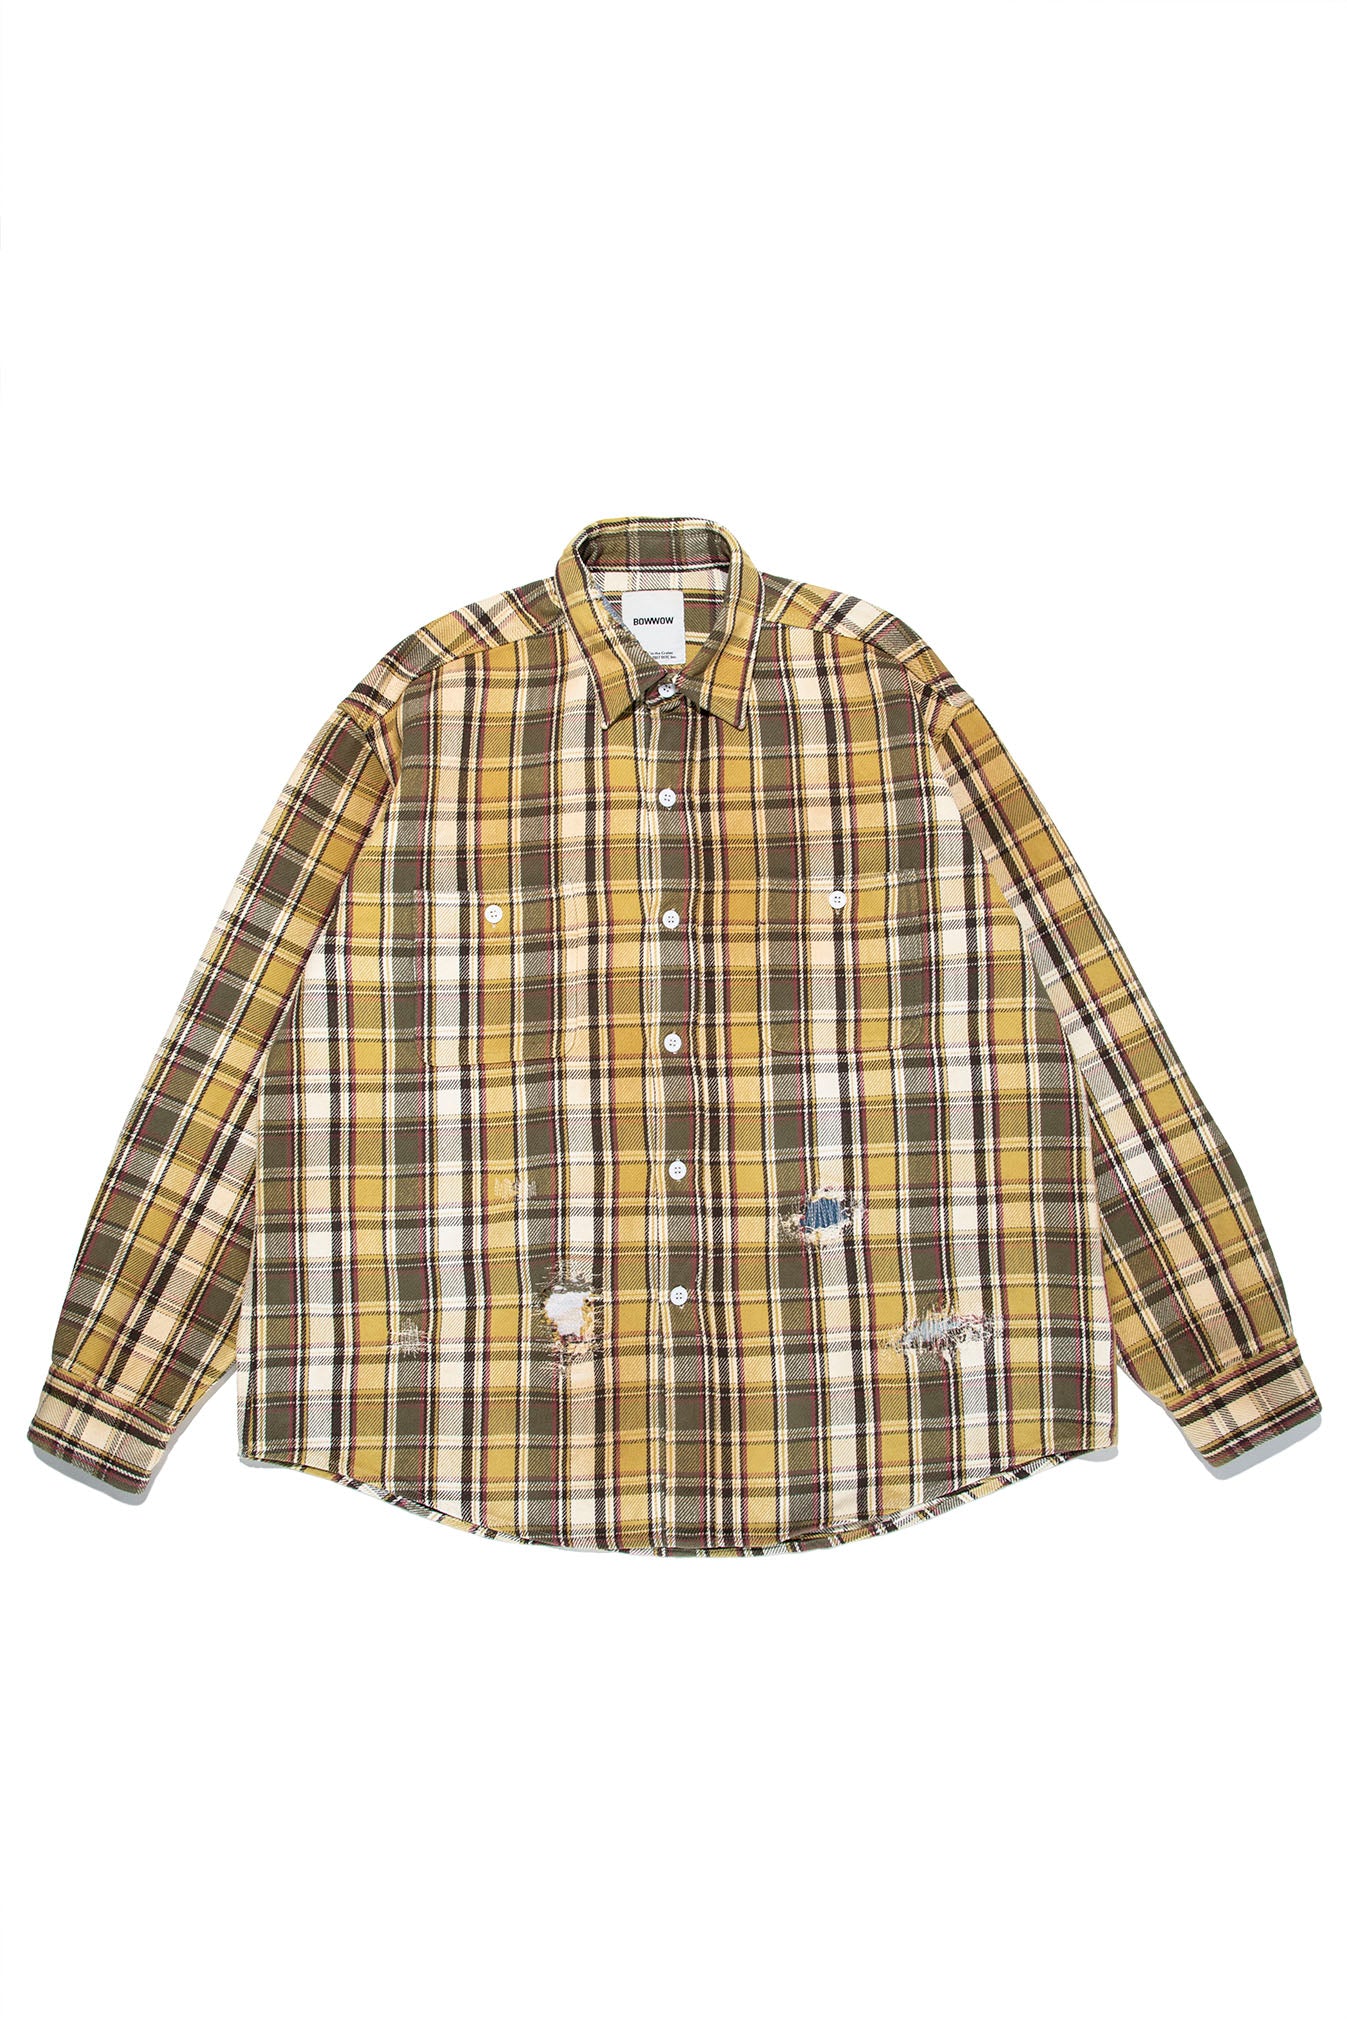 REPAIRED FLANNEL SHIRTS KING SIZE – C30 - BOW WOW, RECOGNIZE